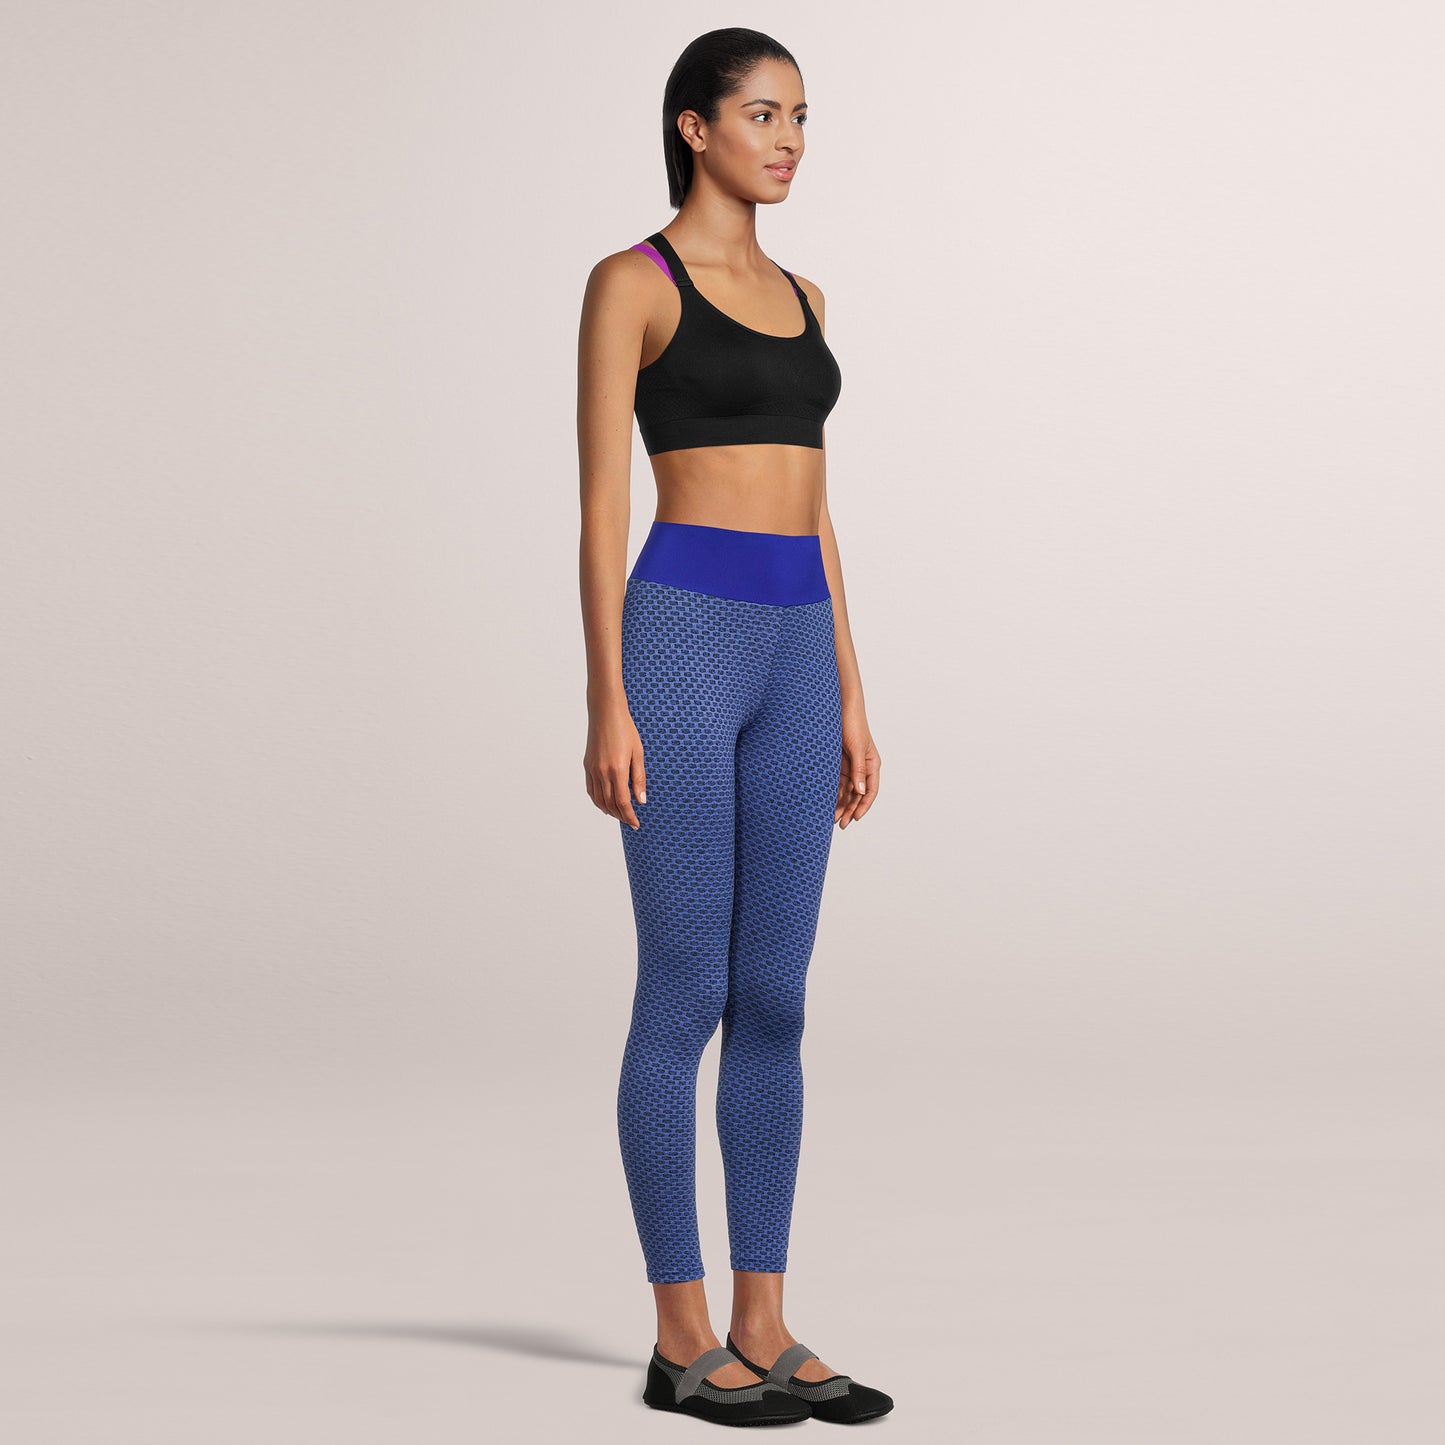 SOBEYO Legging Solid High Waisted Bubble Stretchable Fabric Blue